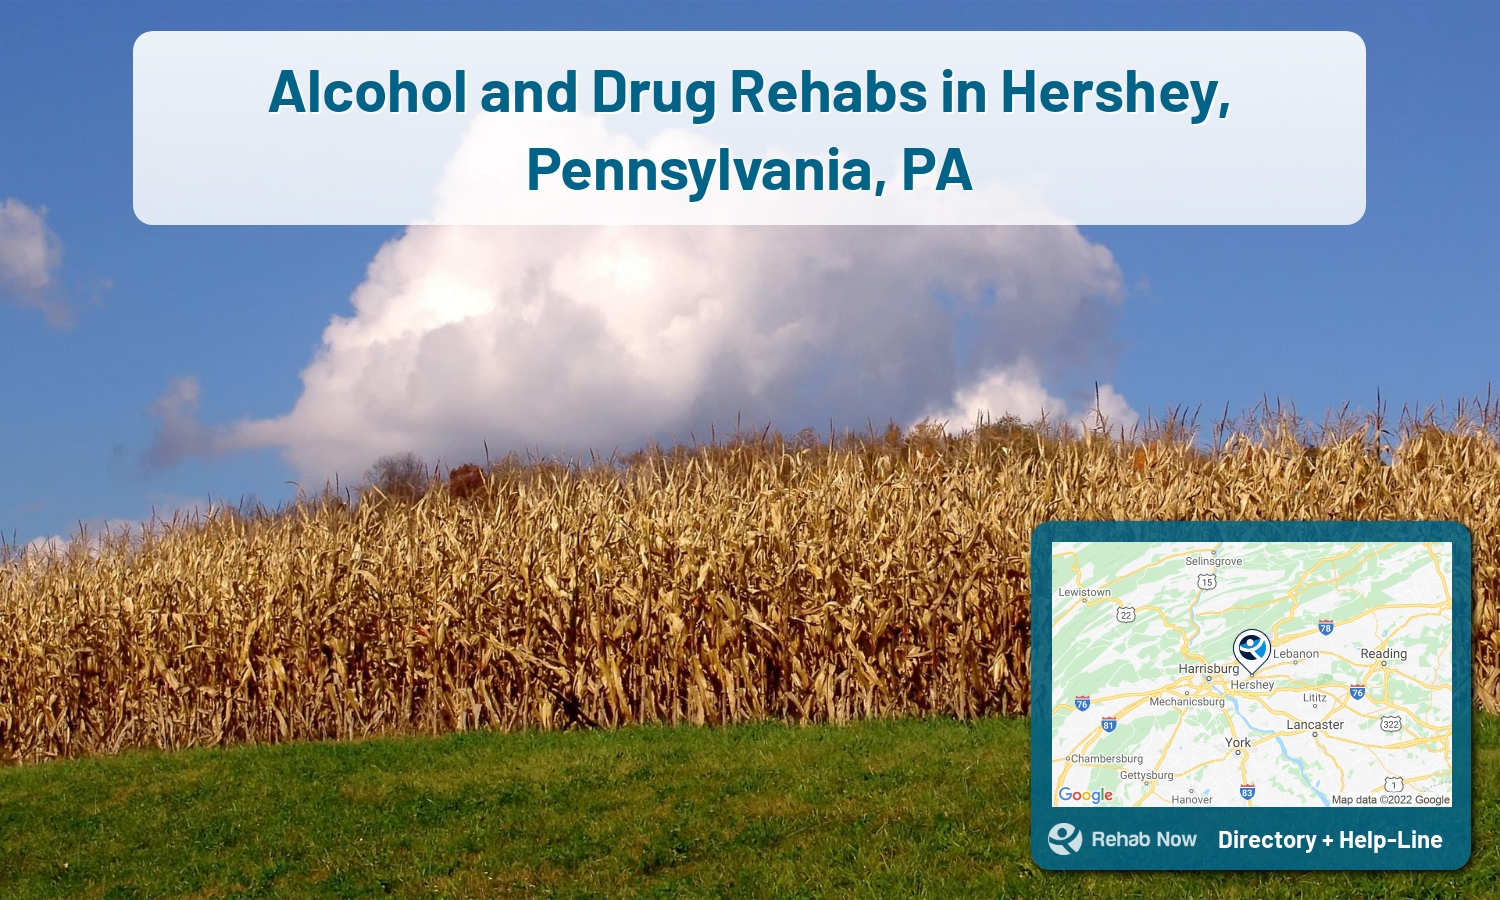 Hershey, PA Treatment Centers. Find drug rehab in Hershey, Pennsylvania, or detox and treatment programs. Get the right help now!